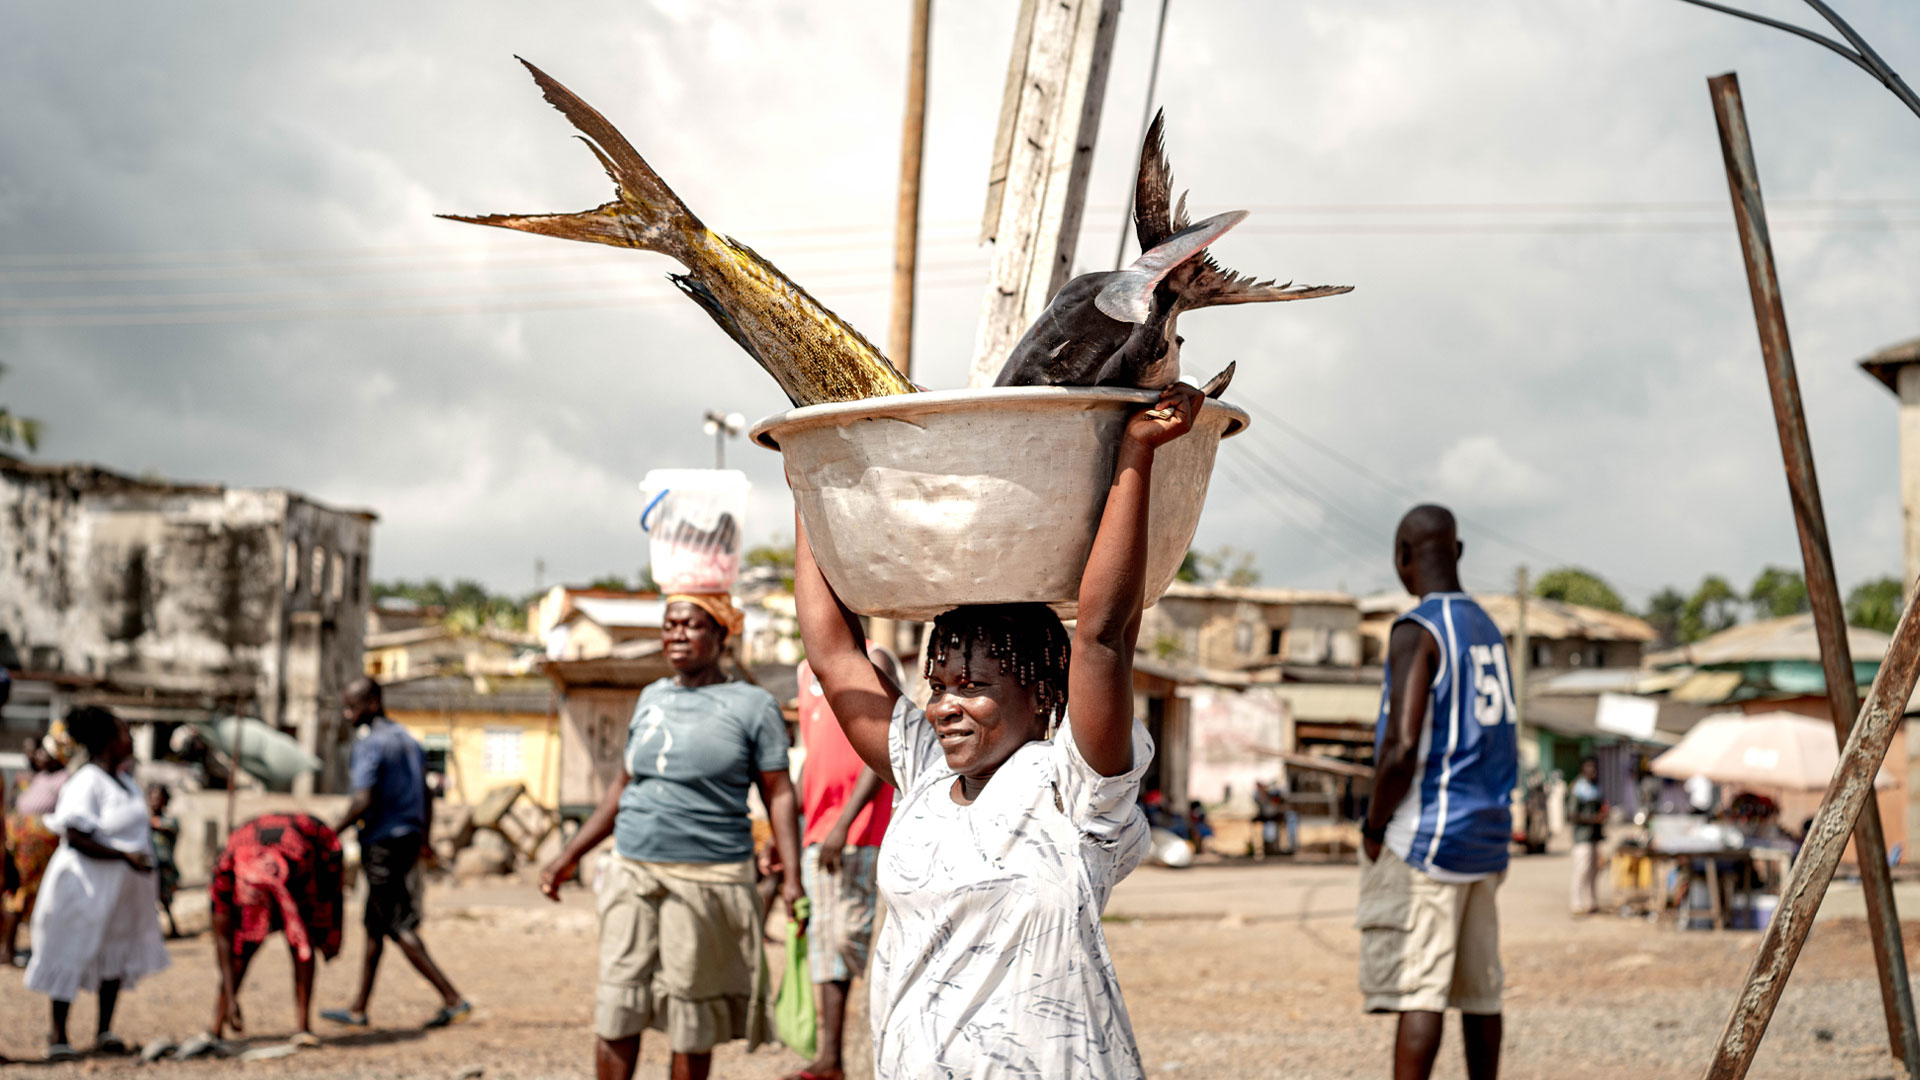 Woman carrying a bucket of fish on her head